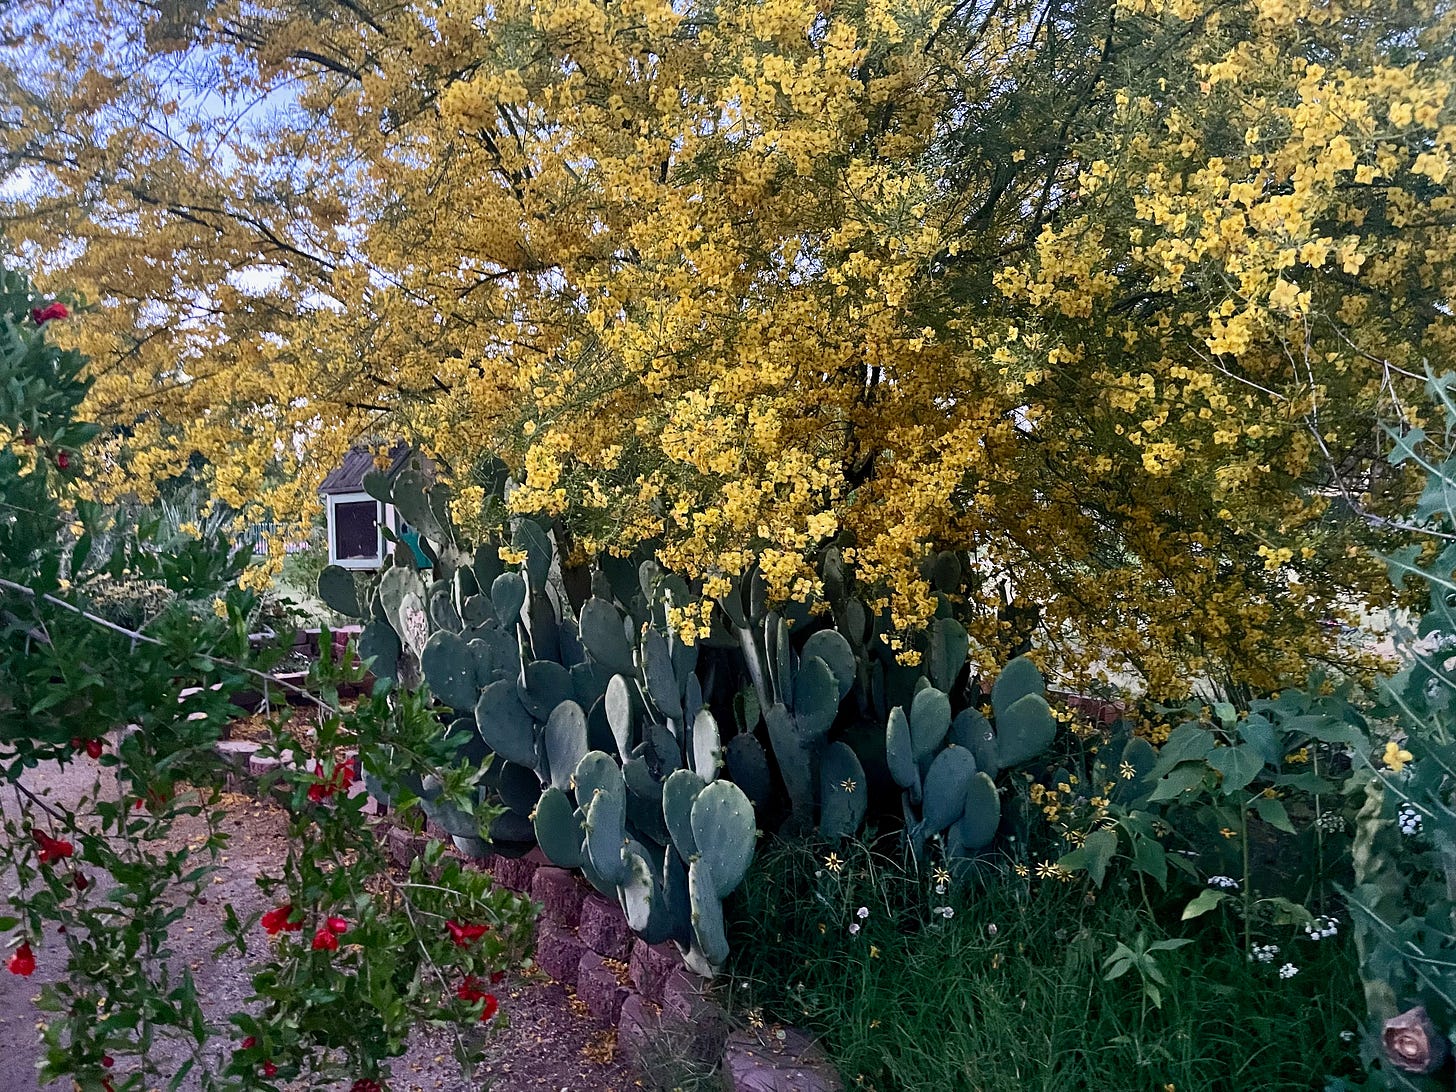 a Palo Verde tree and pomegranate tree in bloom, with some cactus too